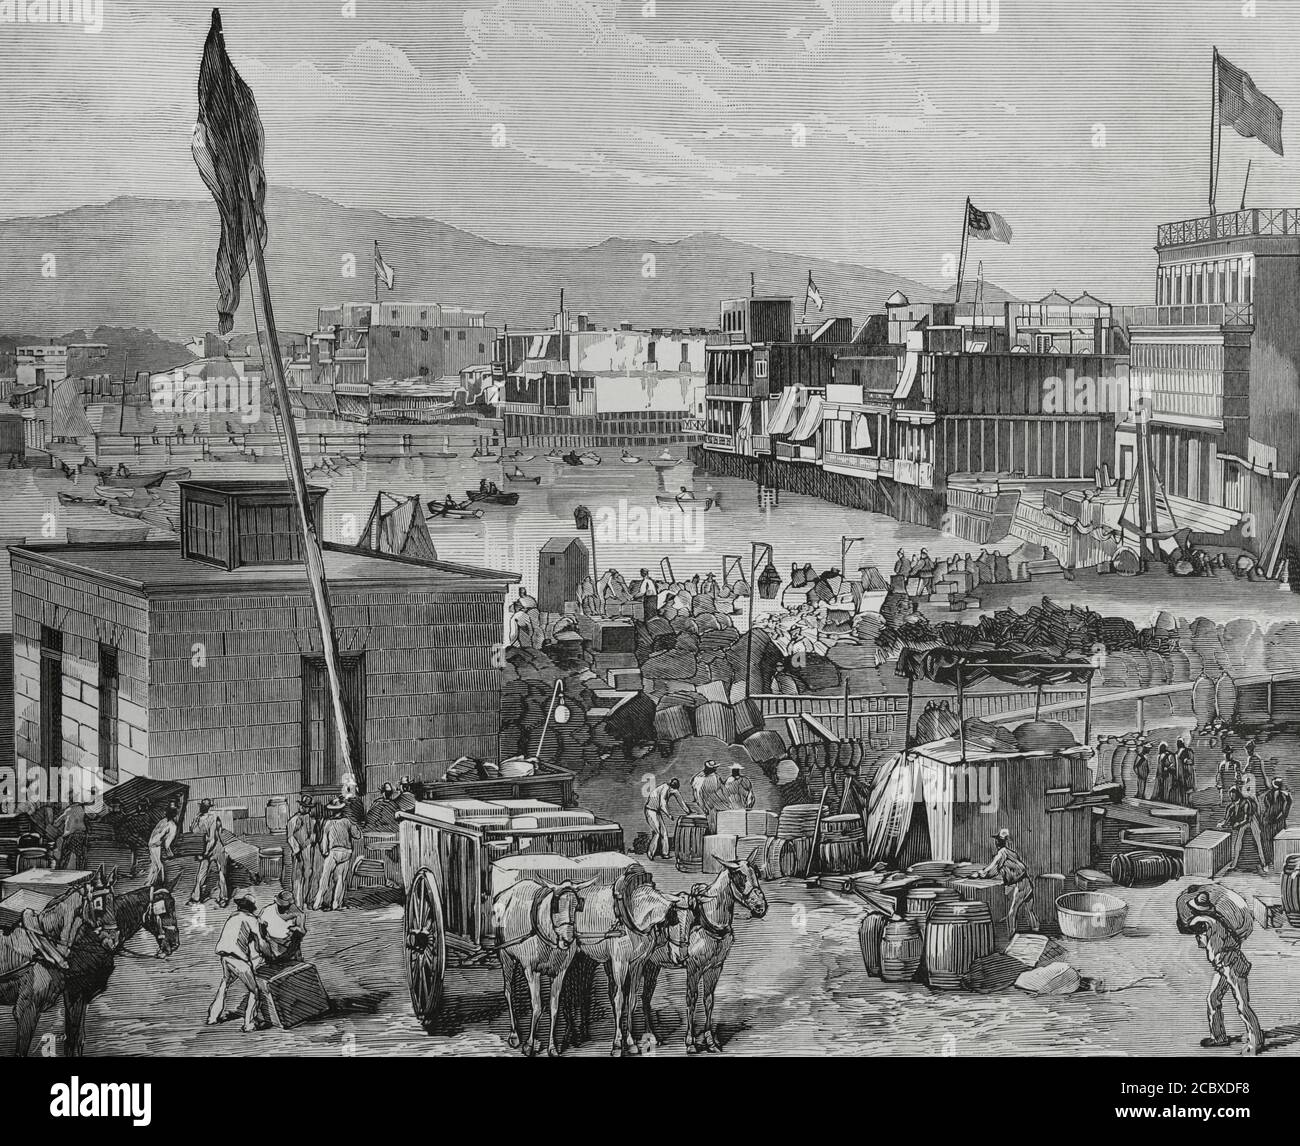 The occupation of Peru's capital, Lima (January 17, 1881 - October 23, 1883), during the Chilean military government, following Peruvian land defeats in the War of the Pacific (1879-1883).  'Callao de Lima. Evacuation of the city of the foreign nationals because of the approach of the Chilean squadron'. Chile's forces occupied Lima in January 1881. Engraving. La Ilustracion Española y Americana, 1881. Stock Photo